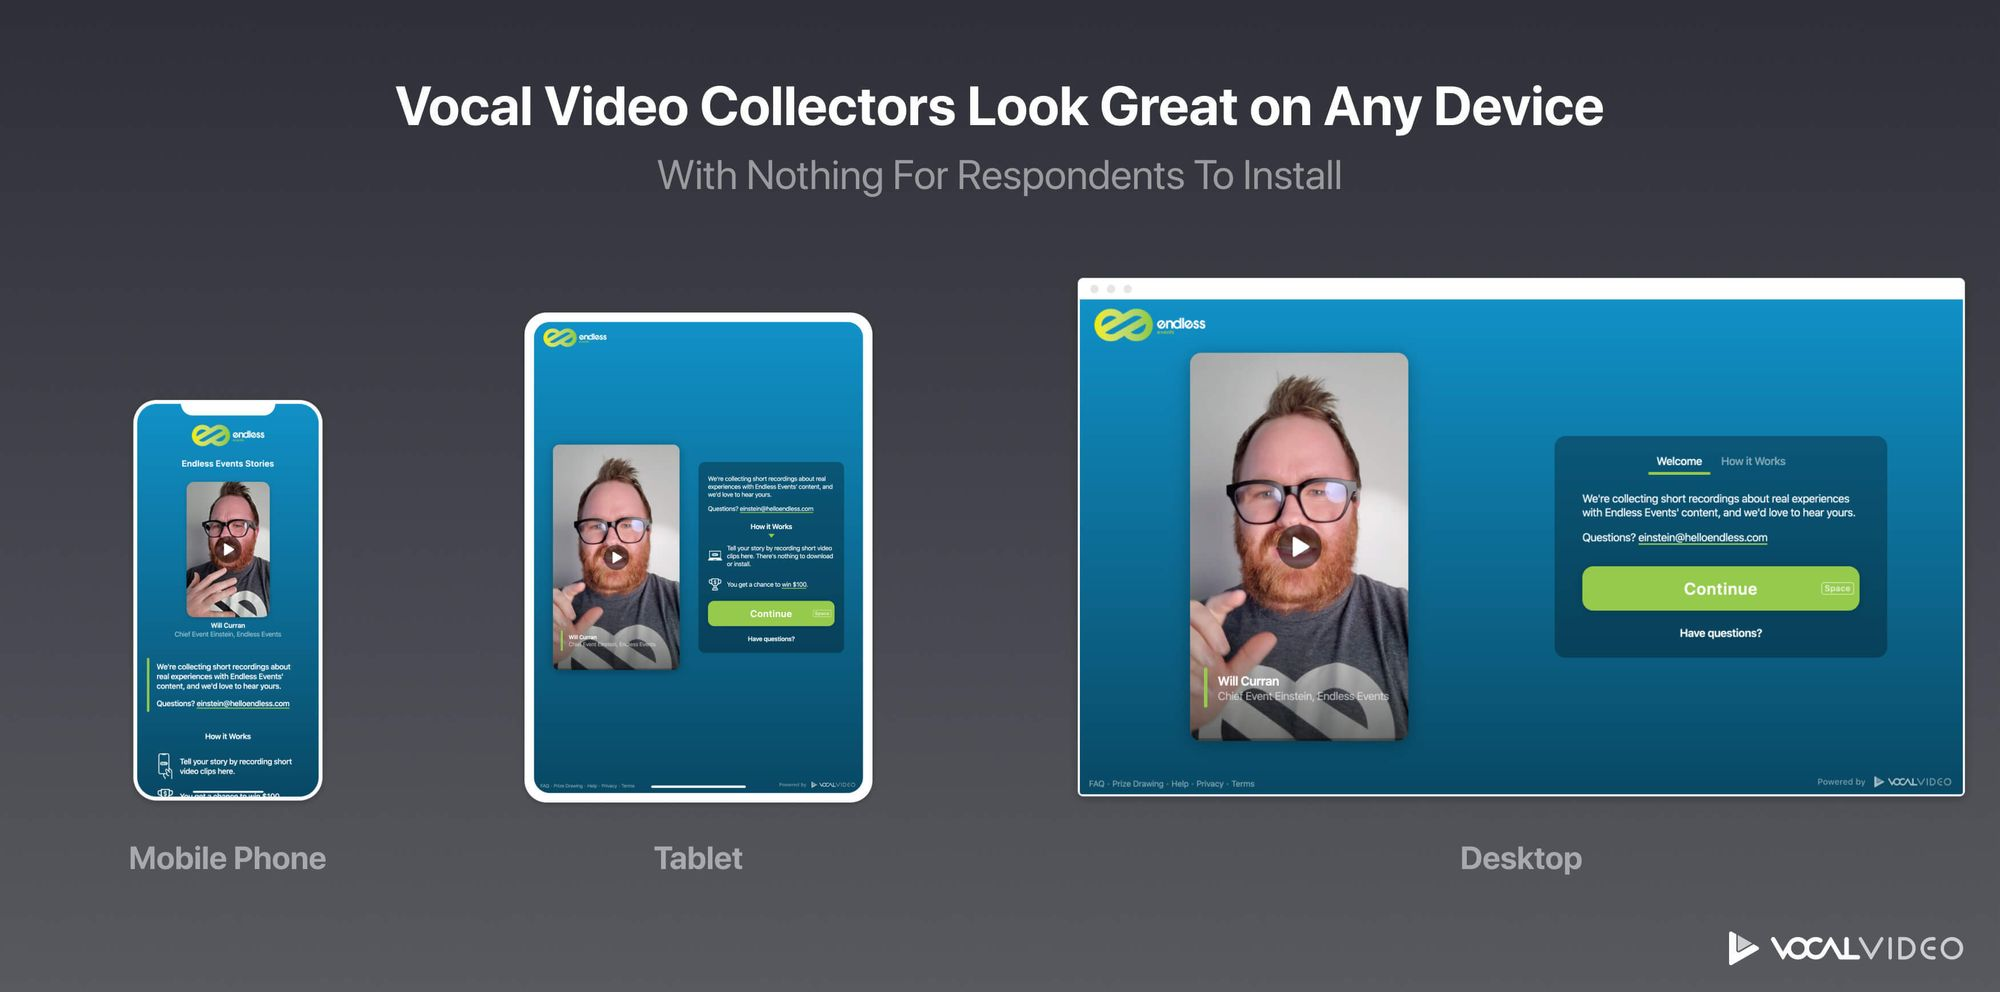 Vocal Video Collectors Look Great on Any Device: With nothing for respondents to install.